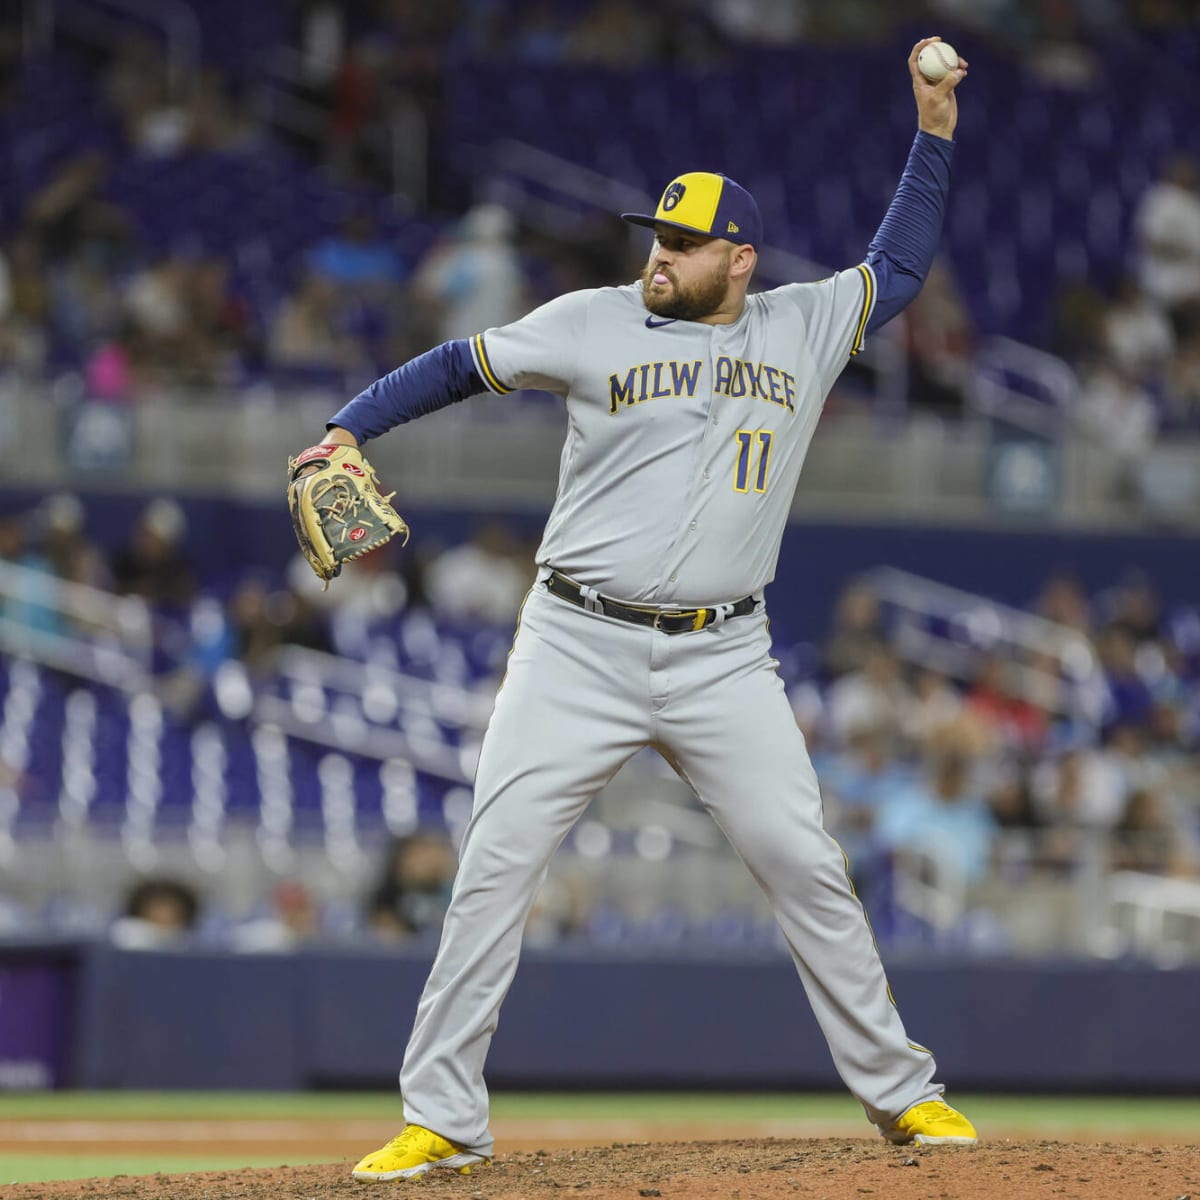 Pair of Brewers stars make team history in rout of Marlins